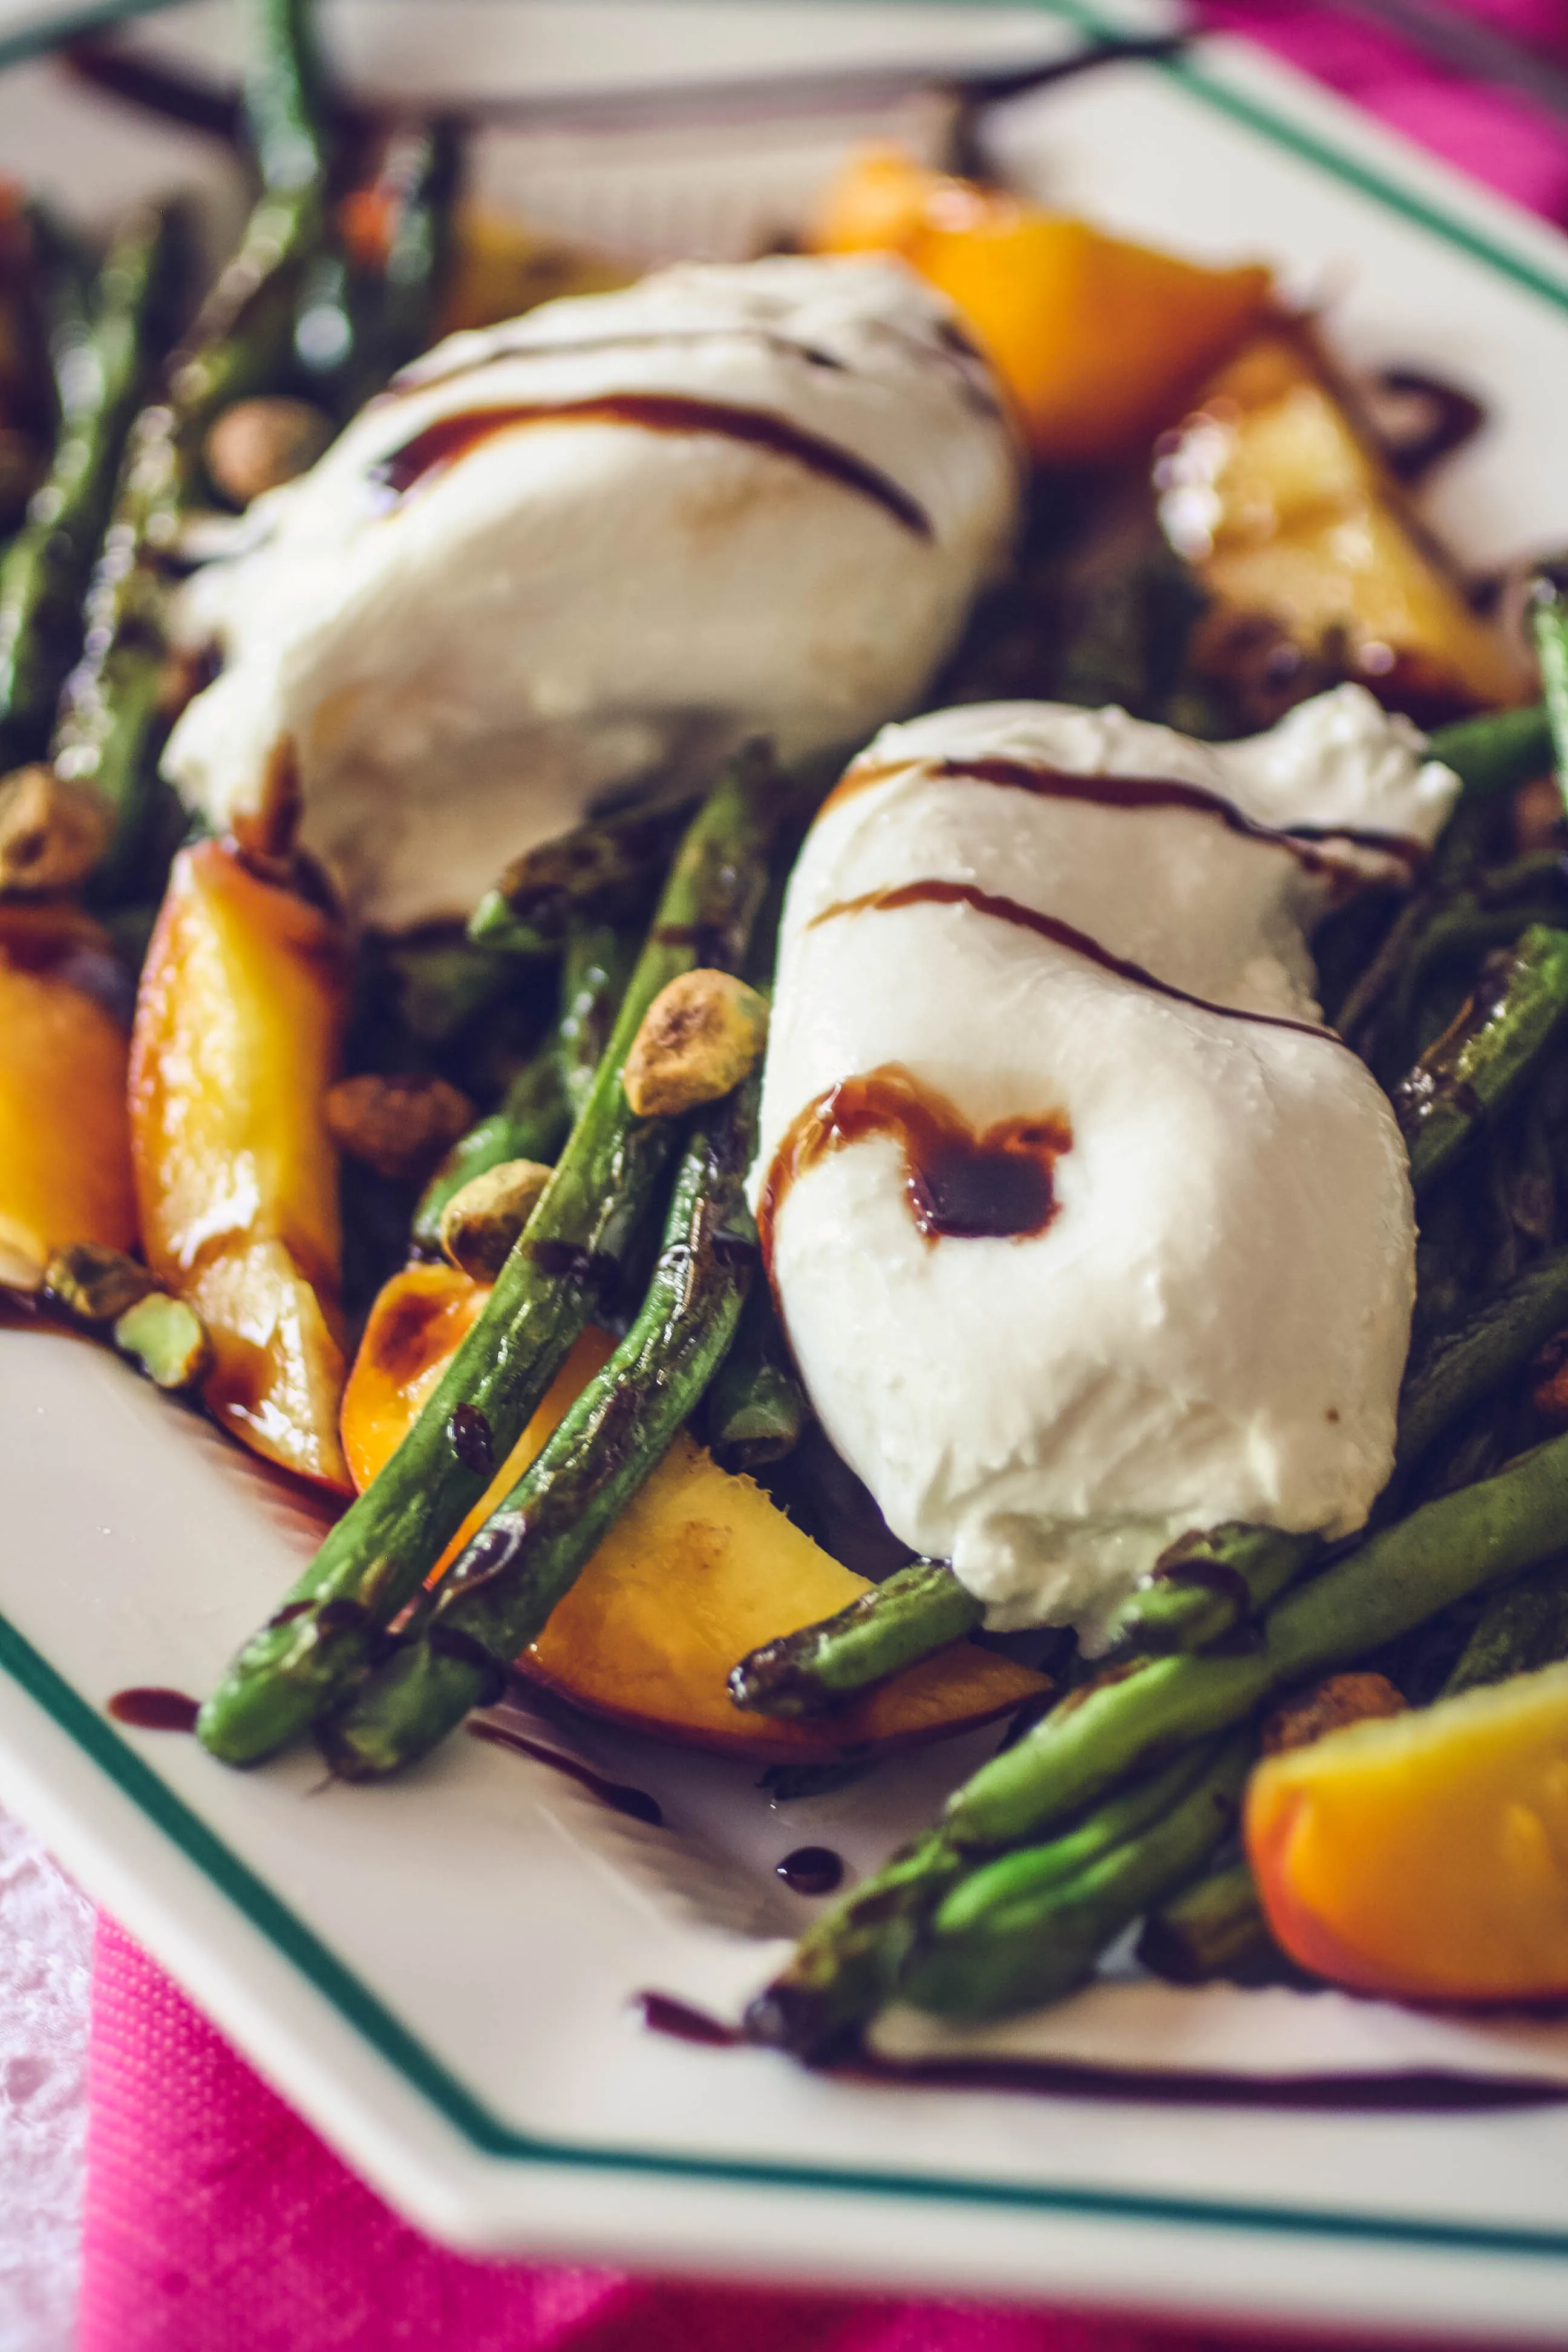 Charred Green Beans with Burrata and Peaches is lovely in the summer. Charred Green Beans with Burrata and Peaches is a great summer salad!